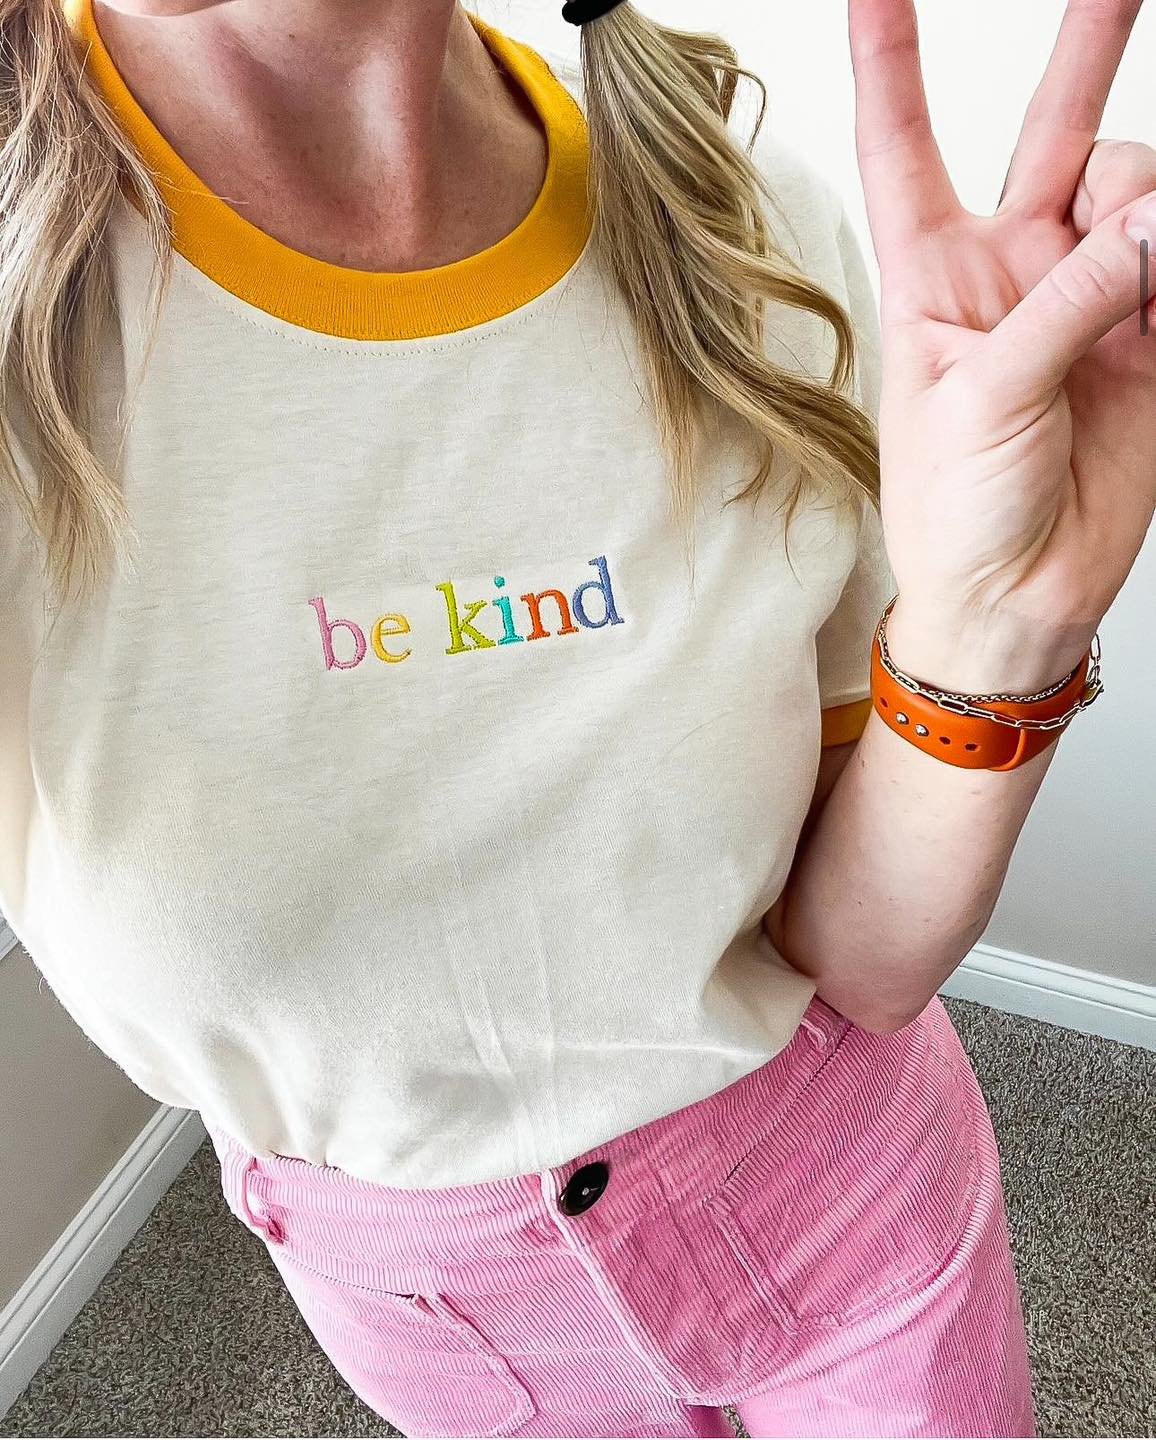 Spread love and positivity with this &quot;Be Kind&quot; t-shirt that's perfect for any occasion! 🌈💕
&bull;
Shirt by: Annabelle Arthur Boutique 🩷

#westsidemarketcincy #shoplocal  #SpreadKindness #PositiveVibesOnly